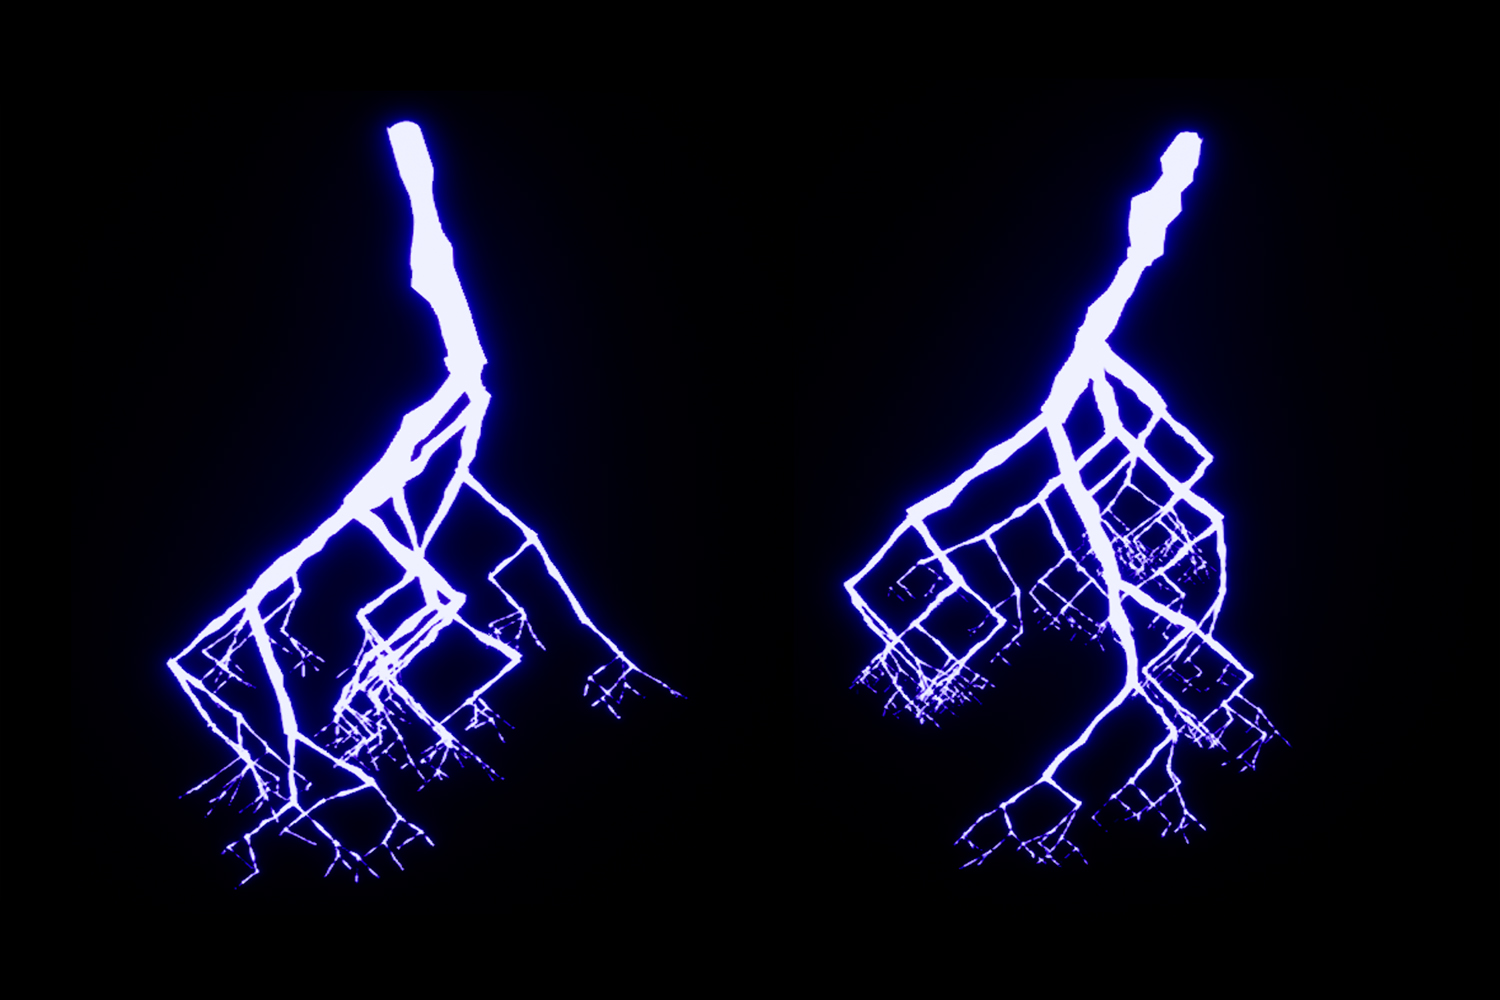 "Physics-based Procedural Generation of Lightning." is a 2022 Digital Graduate Show project by Aleisha Blair, a Computer Games Technology student at Abertay University.